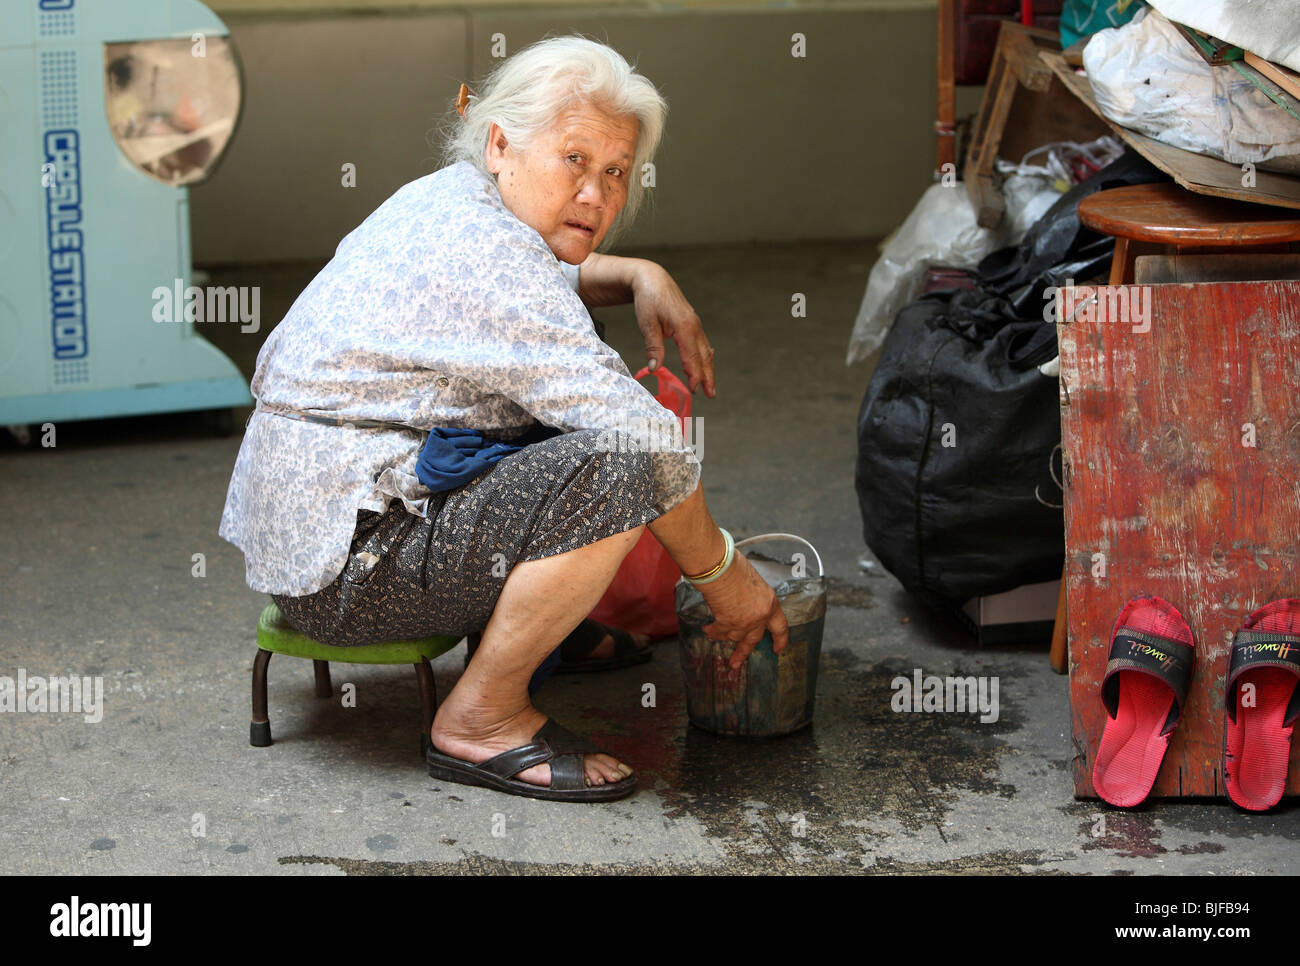 Elderly woman sitting with a bucket of water, Macao, China Stock Photo